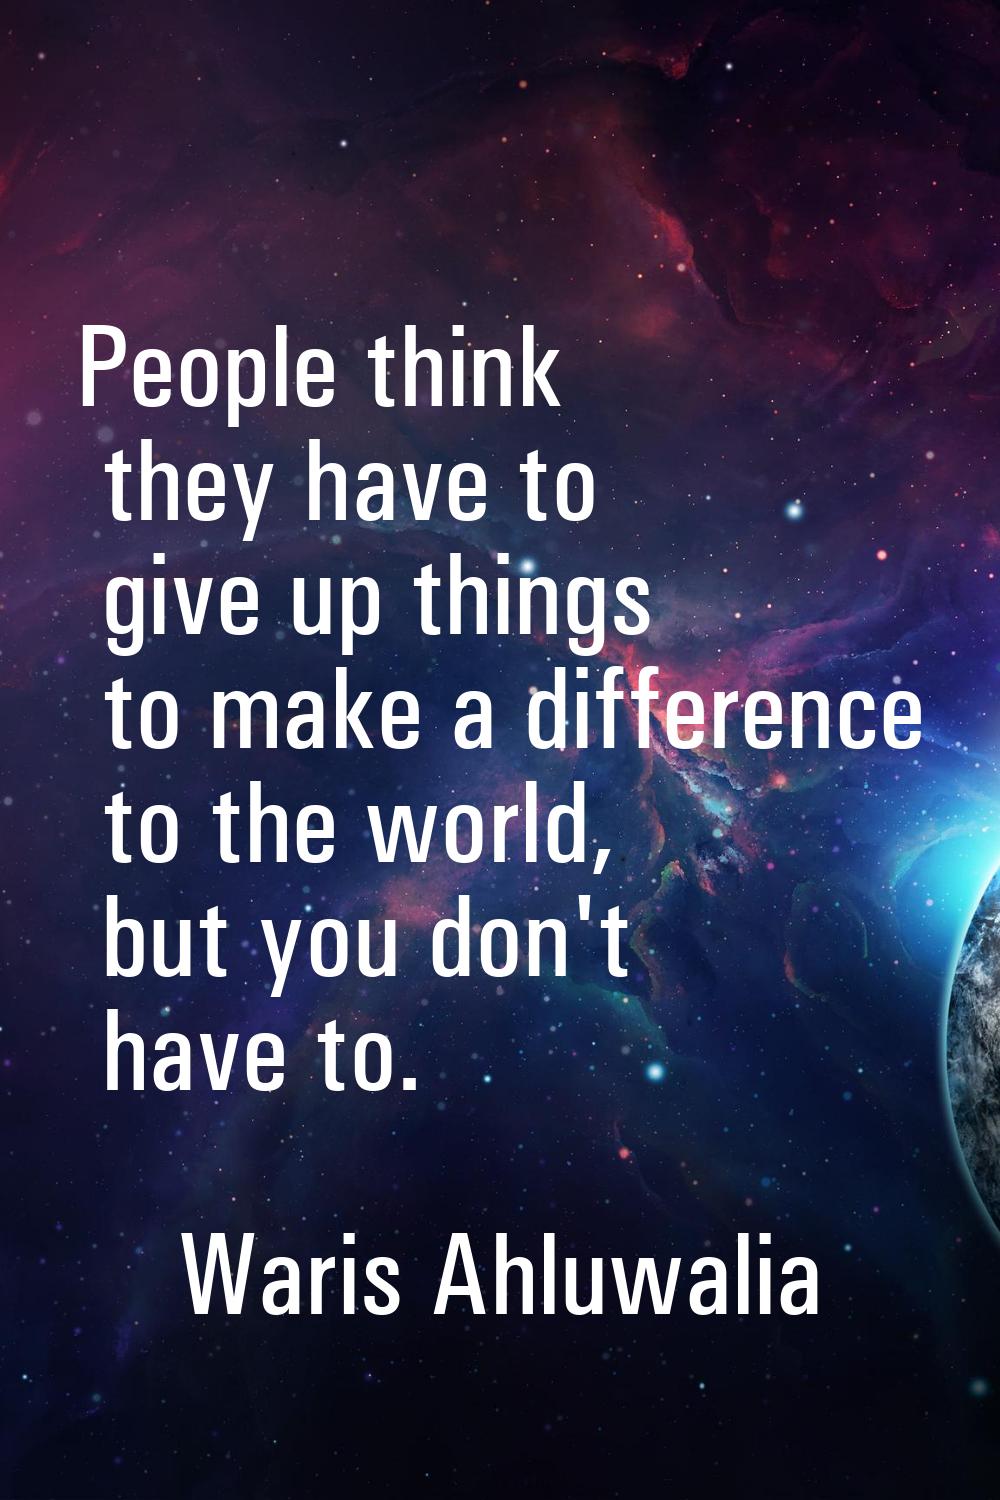 People think they have to give up things to make a difference to the world, but you don't have to.